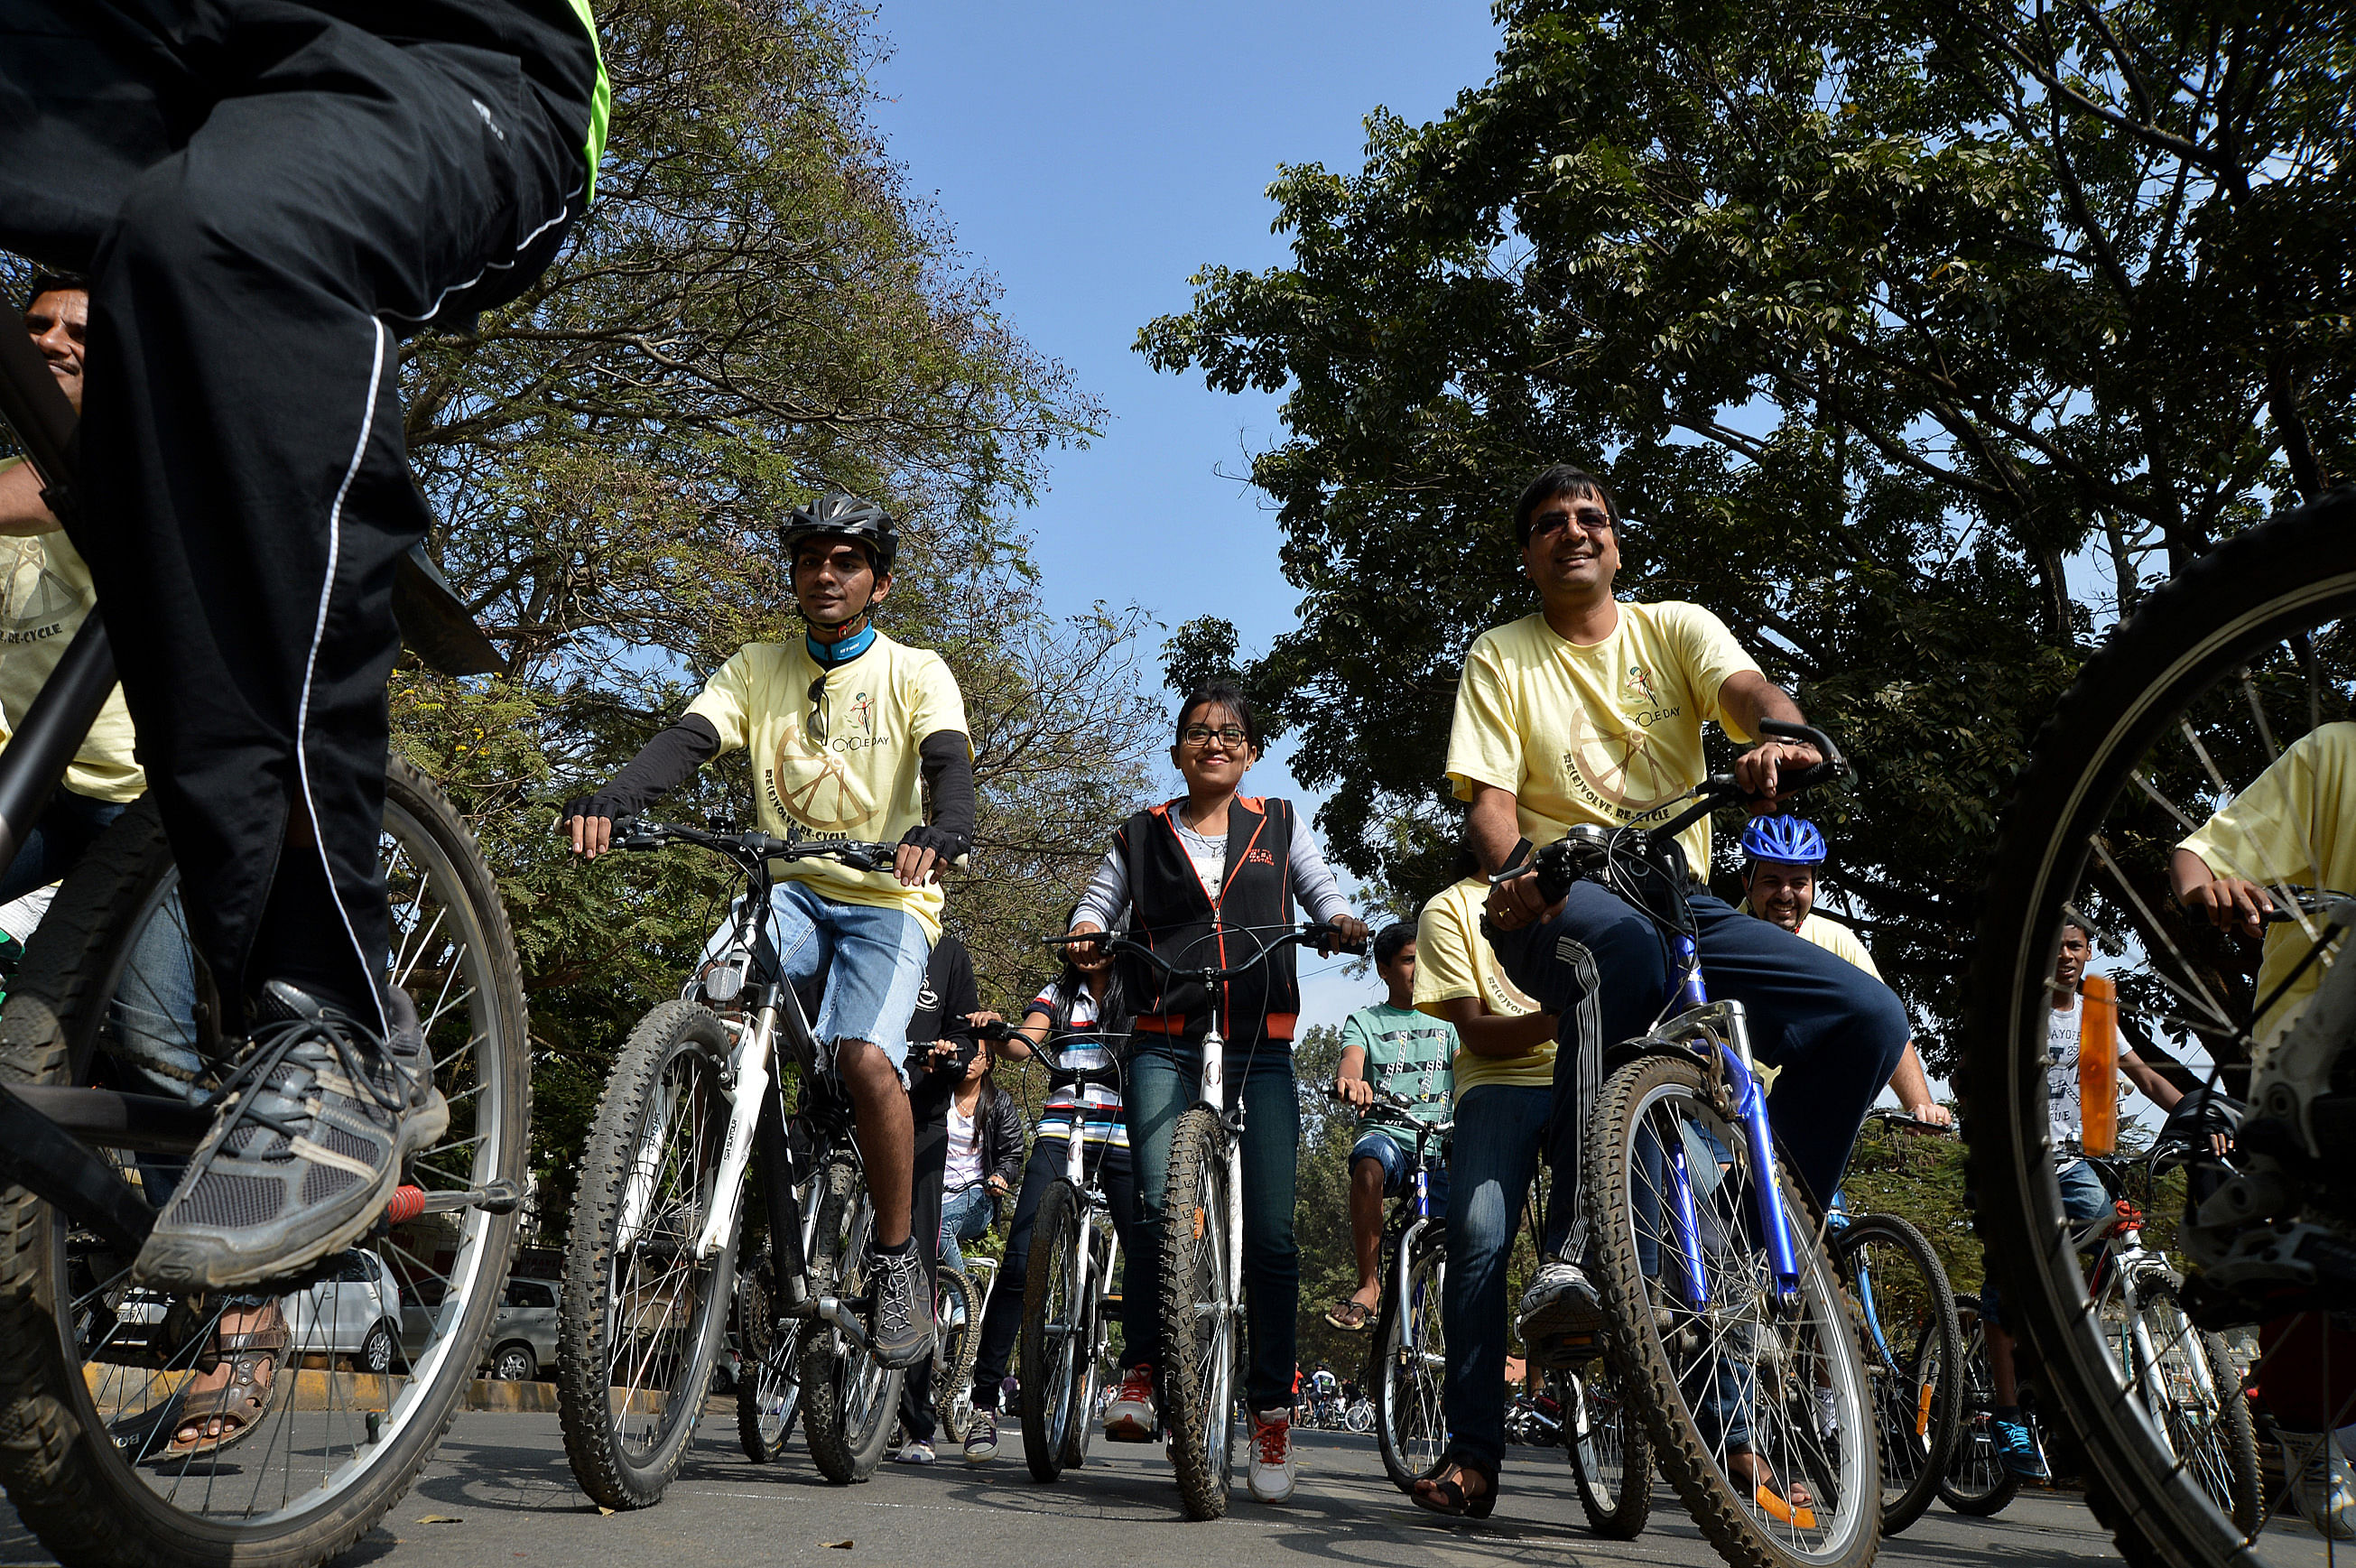 5.5 lakh bicycles for 8th standard students